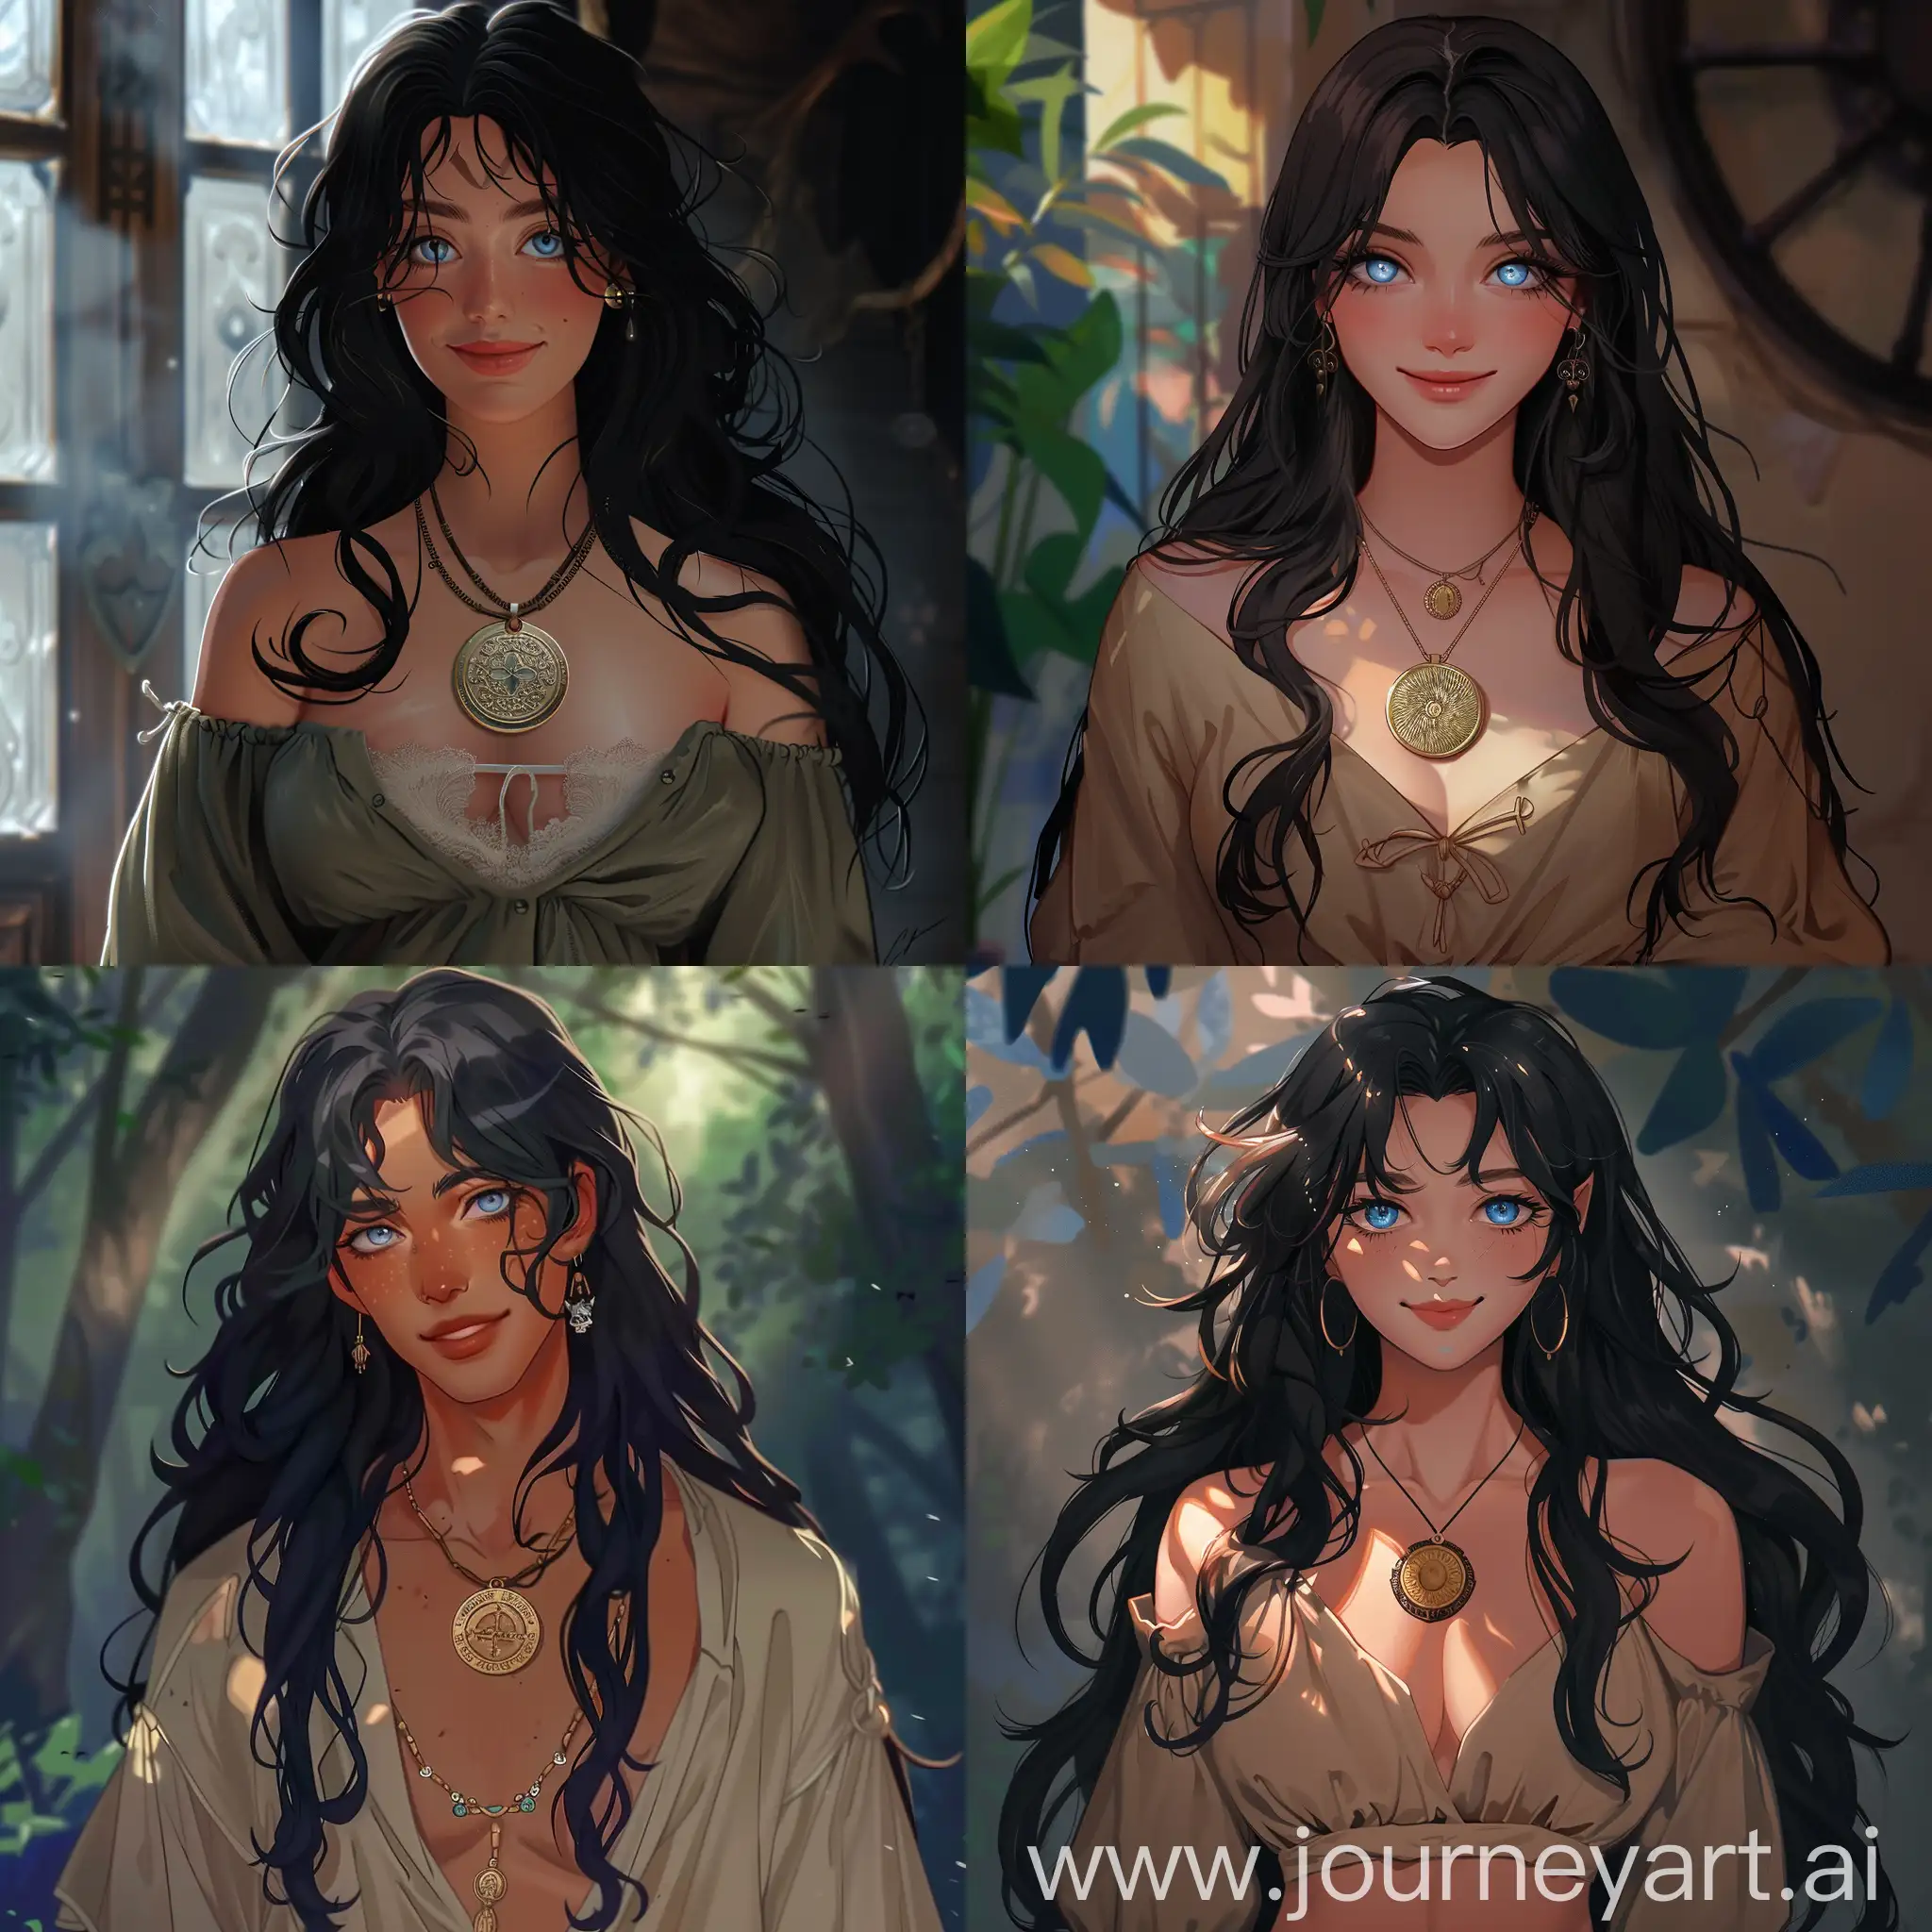 Enchanting-Sorceress-with-Flowy-Hair-and-Medallion-Necklace